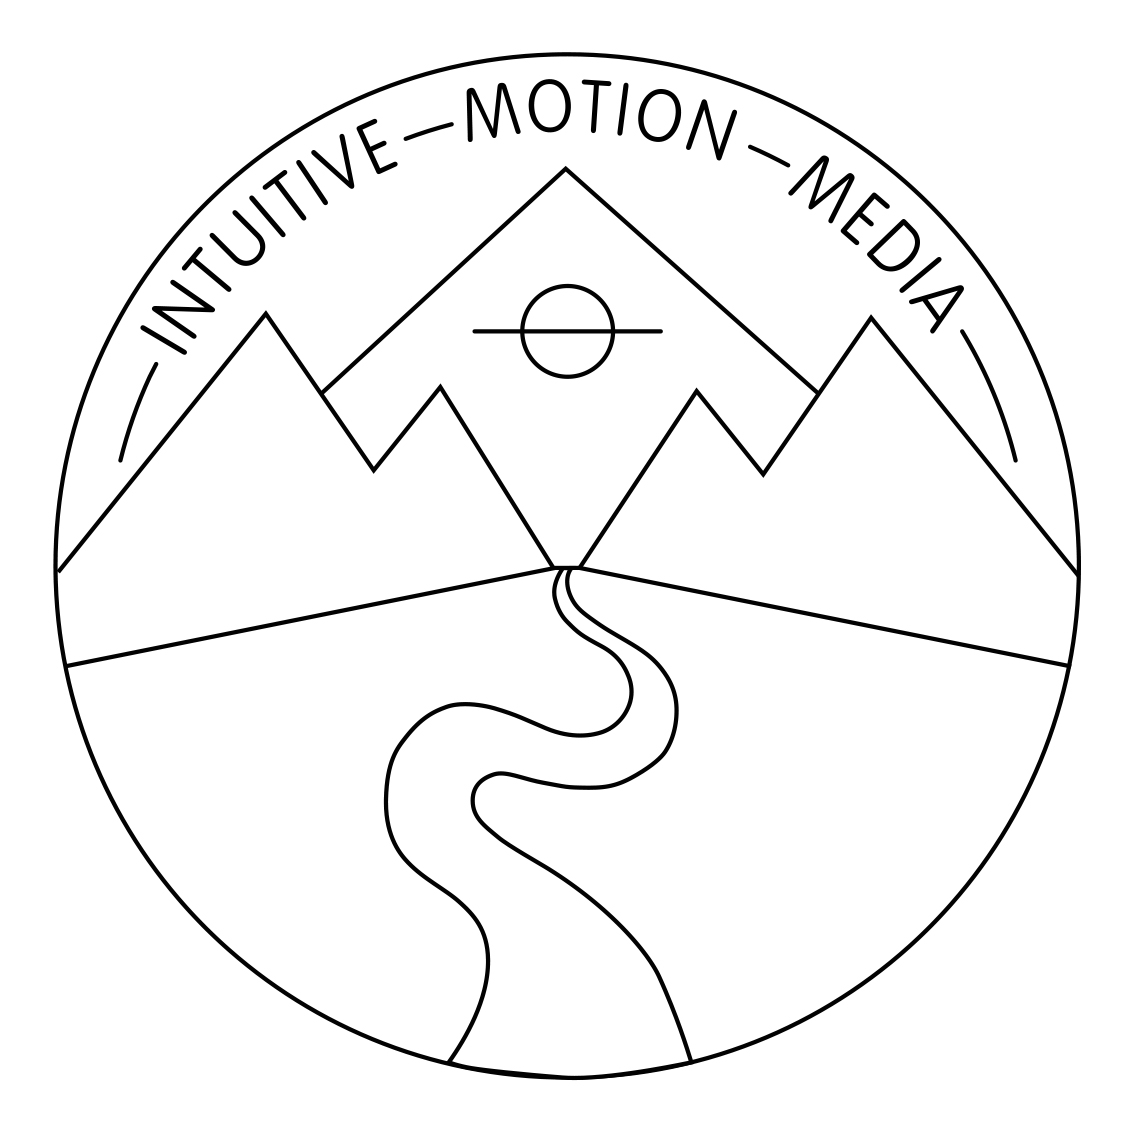 Intuitive Motion Media